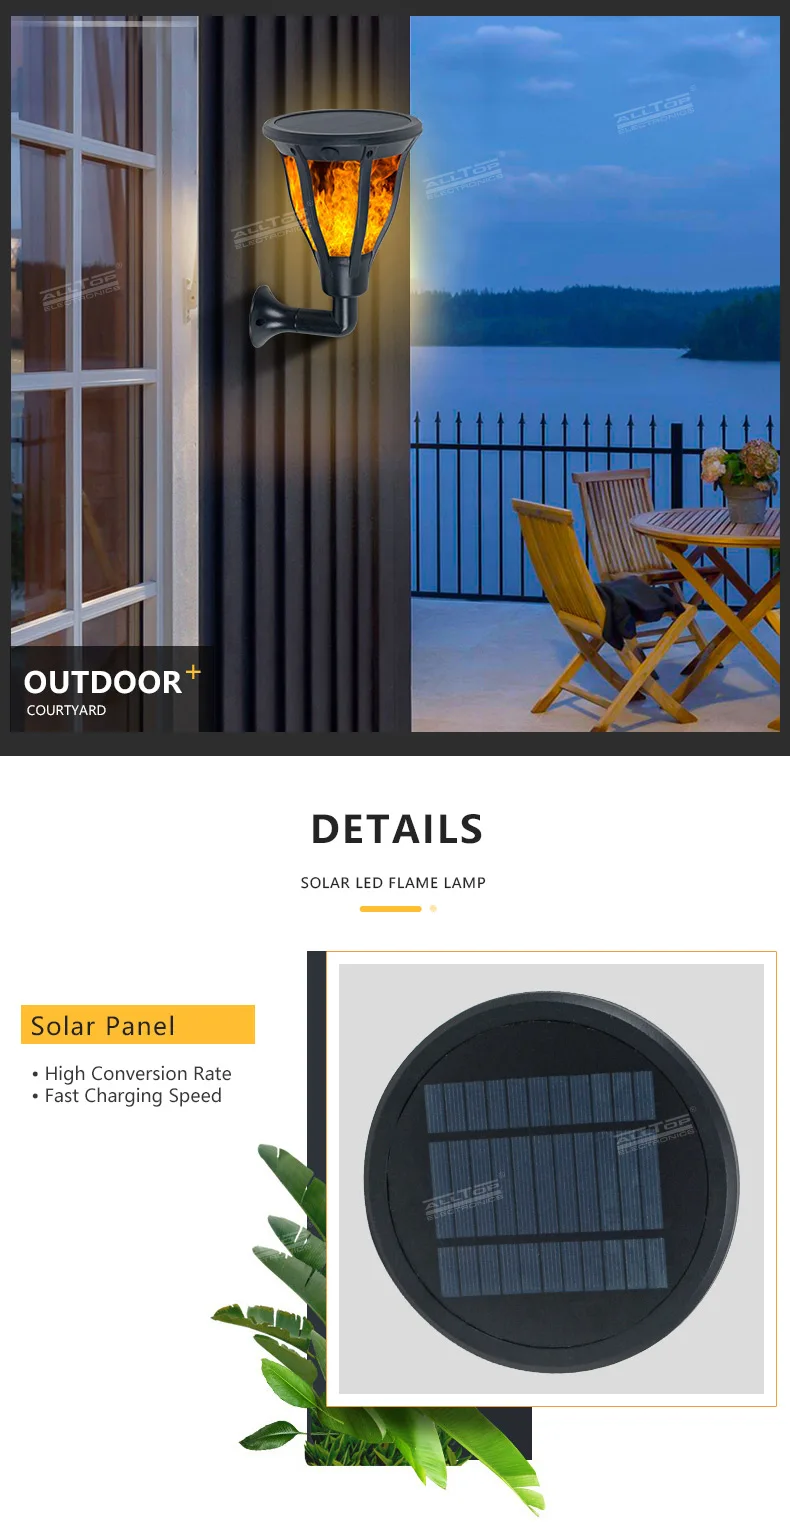 ALLTOP High quality new classic ip65 2w outdoor garden lighting all in one solar led flame light